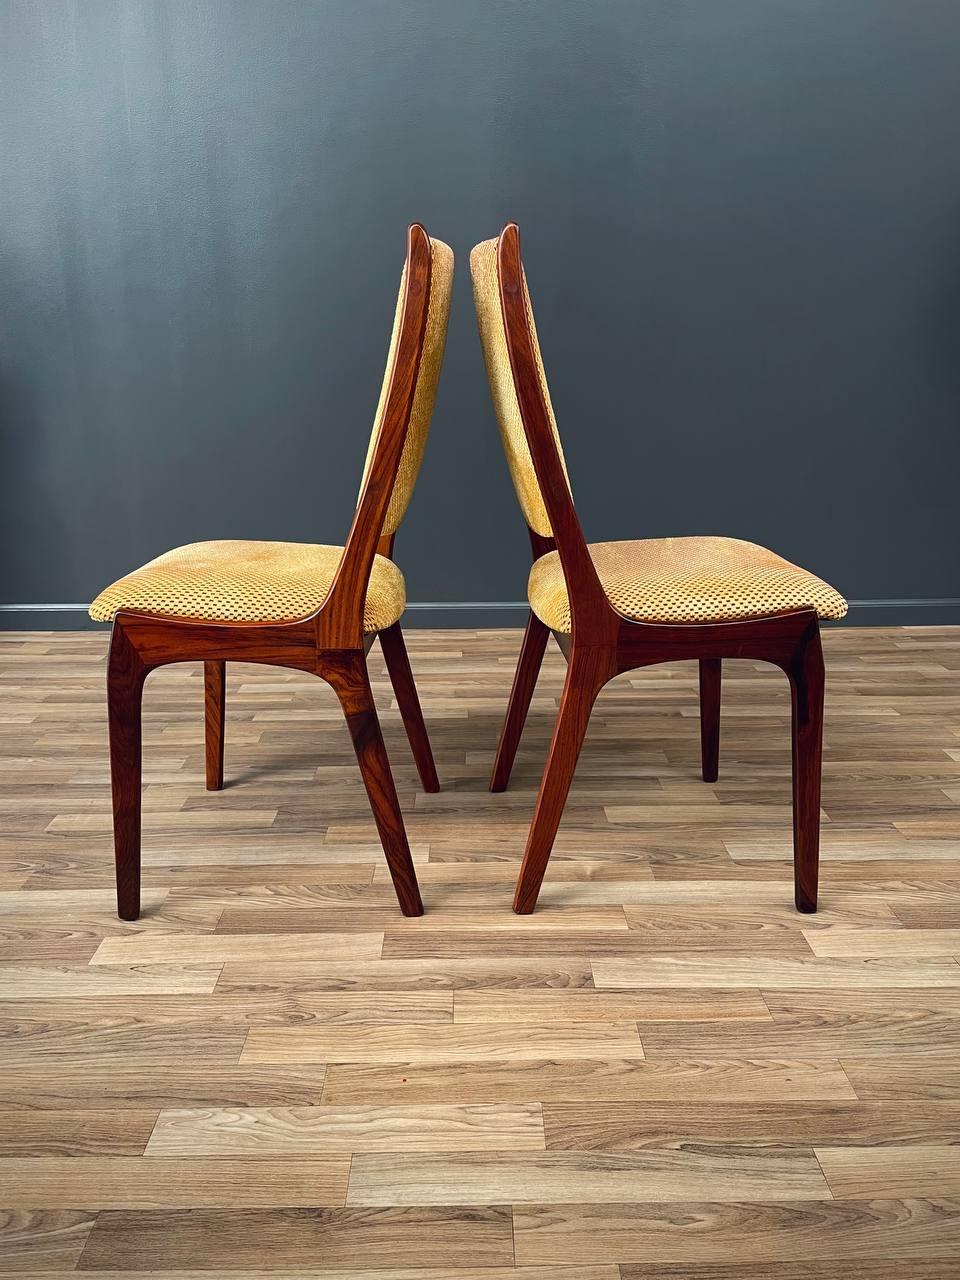 Upholstery Set of 6 Danish Modern Rosewood Dining Chairs by Korup Stolefabrik